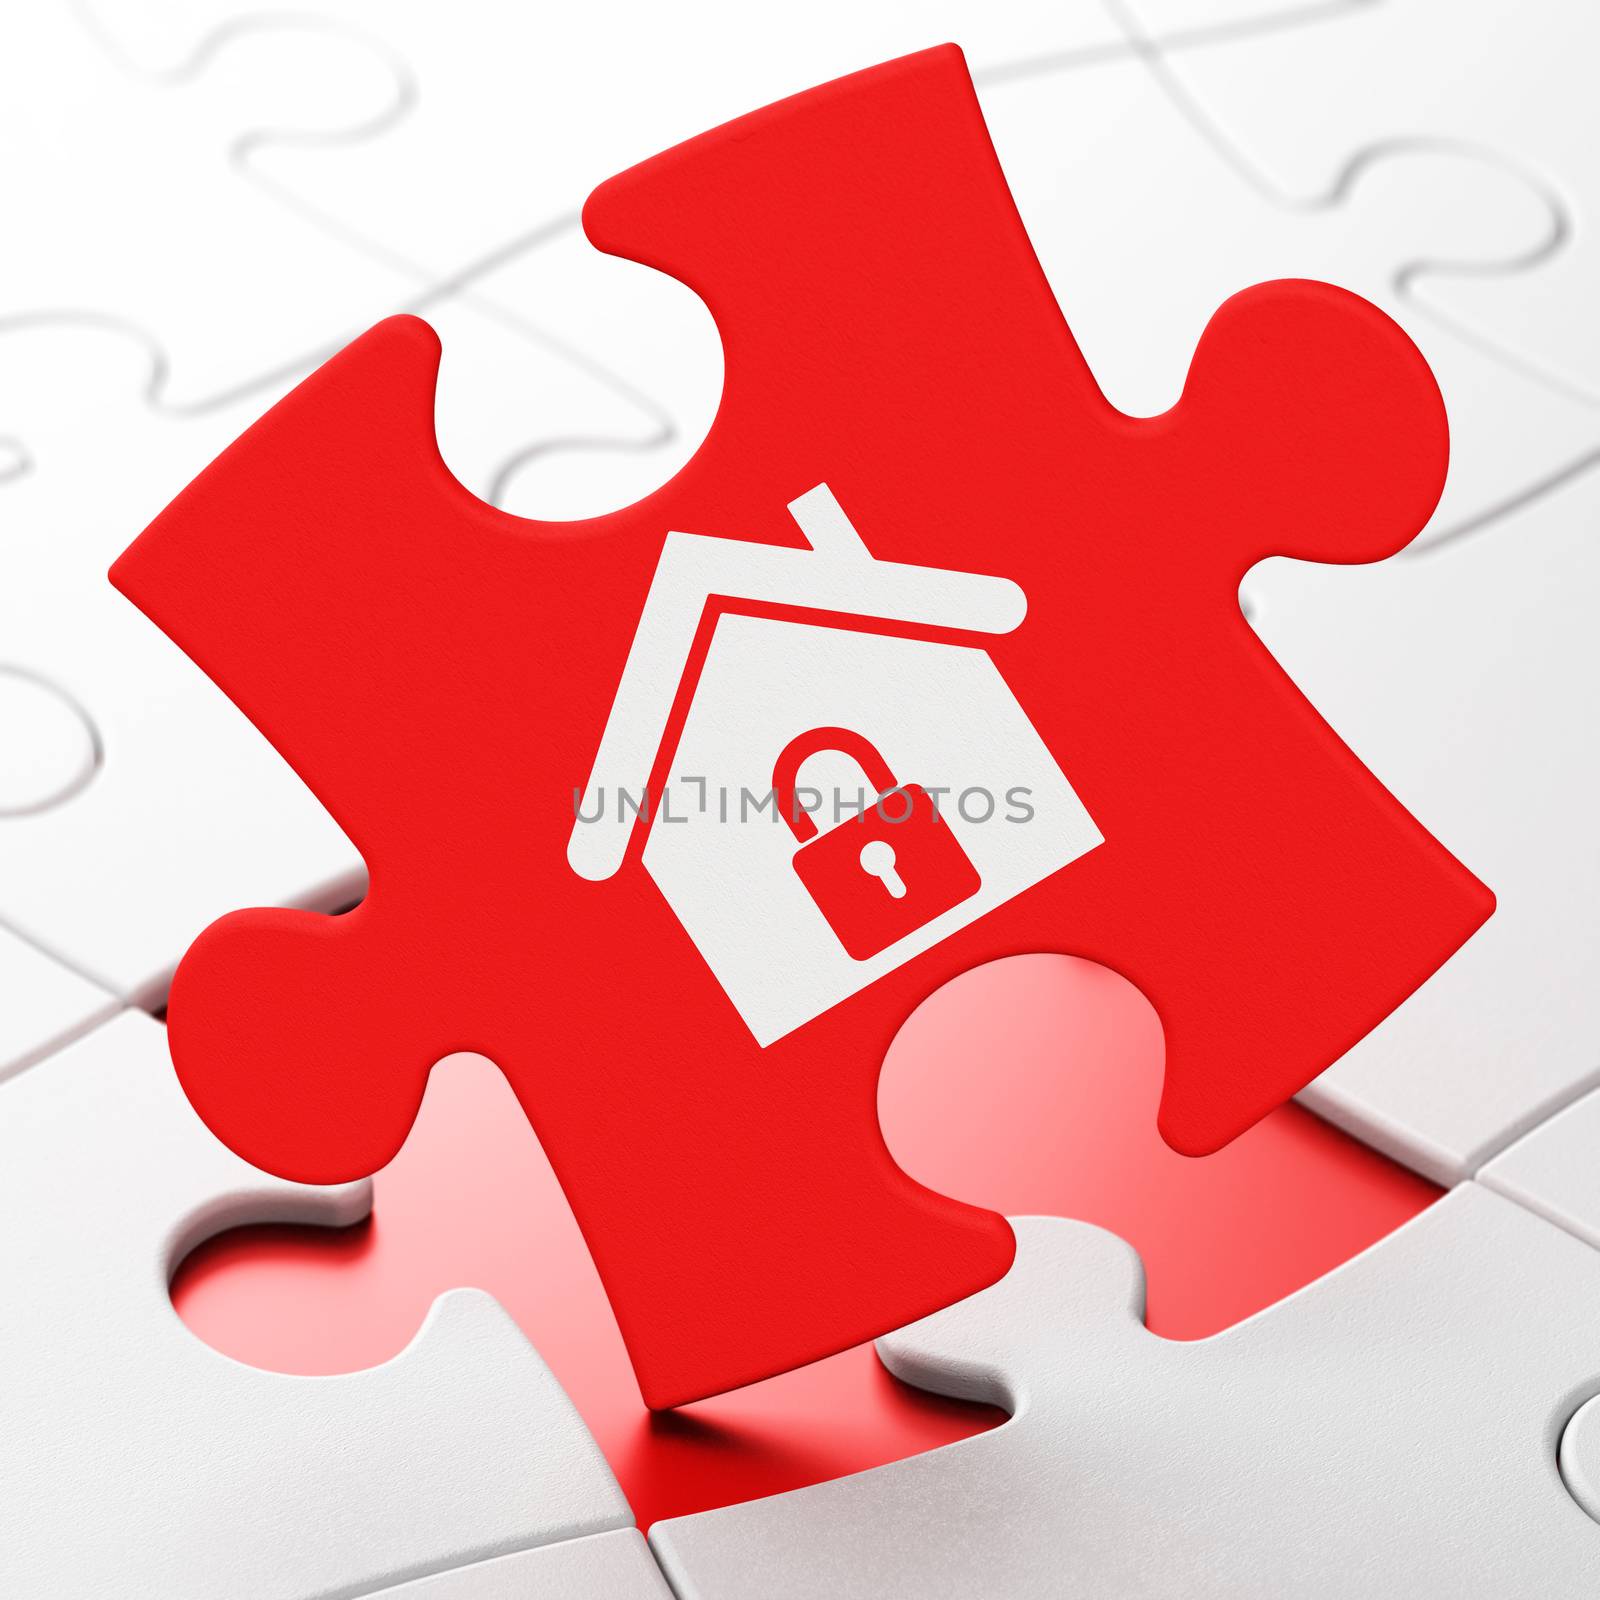 Finance concept: Home on Red puzzle pieces background, 3d render